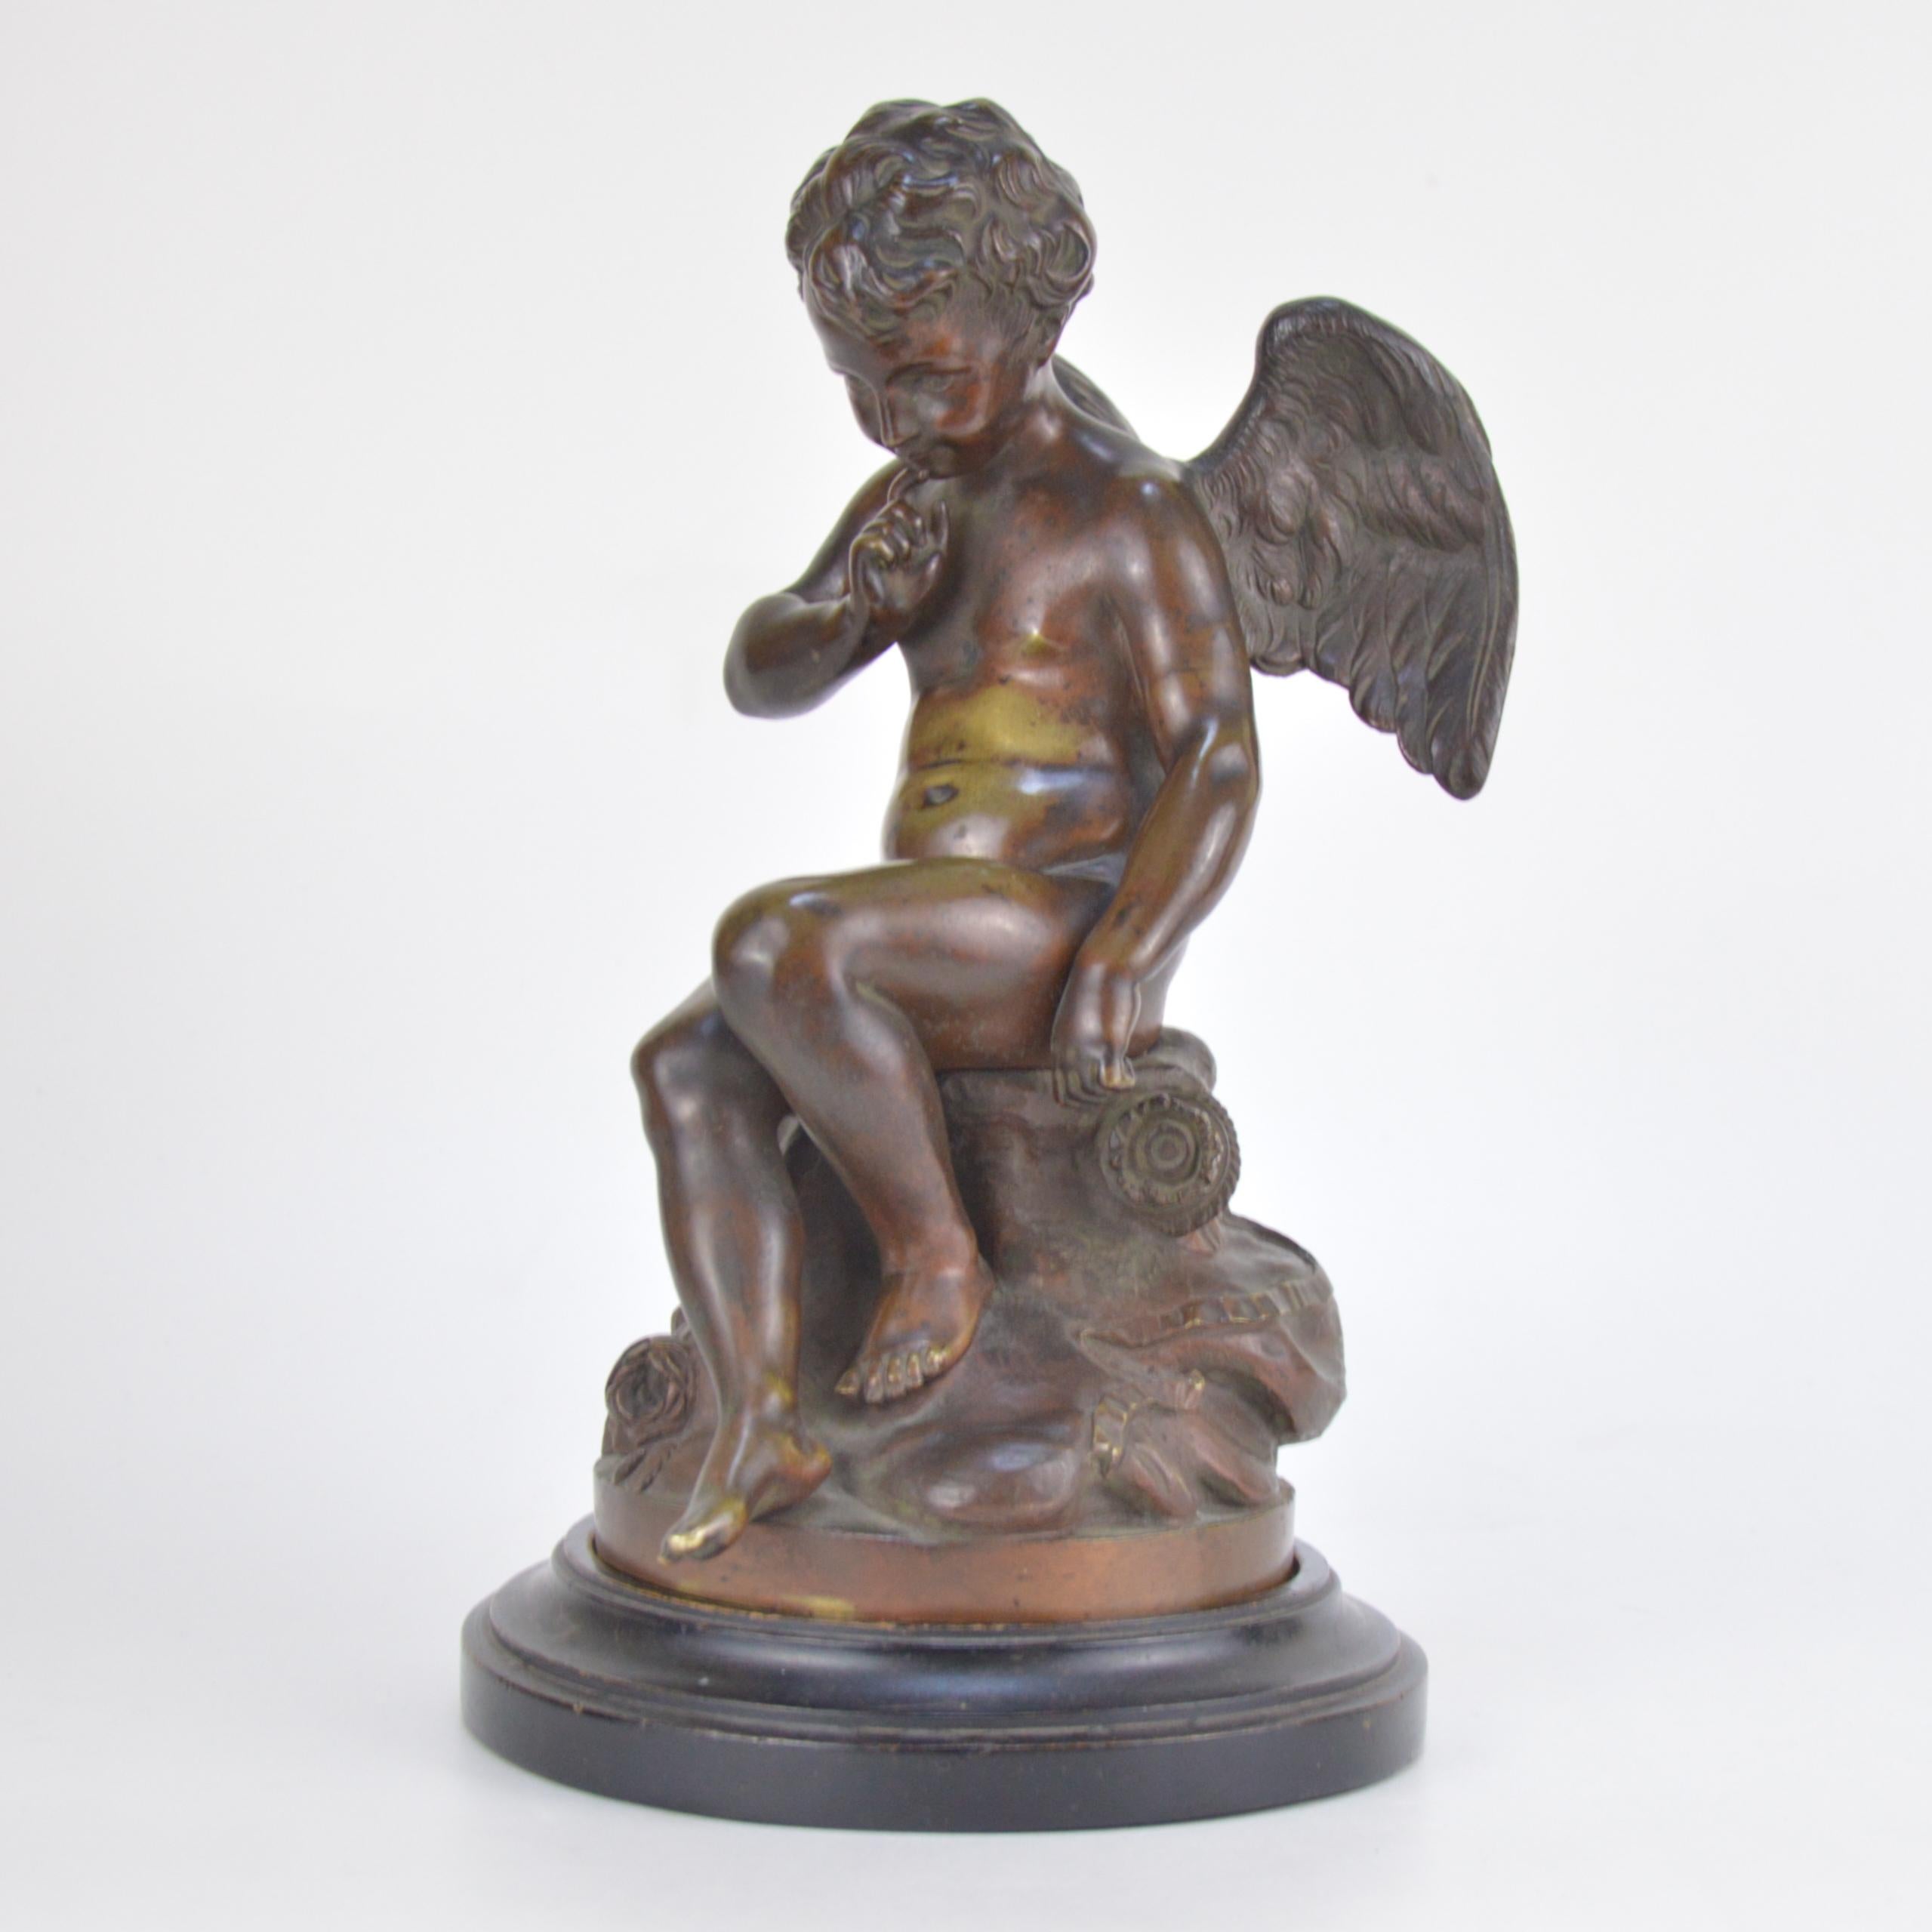 Patinated bronze statue representing Amour. French school, 19th century. Wooden base.
Measures: Height 27 cm.